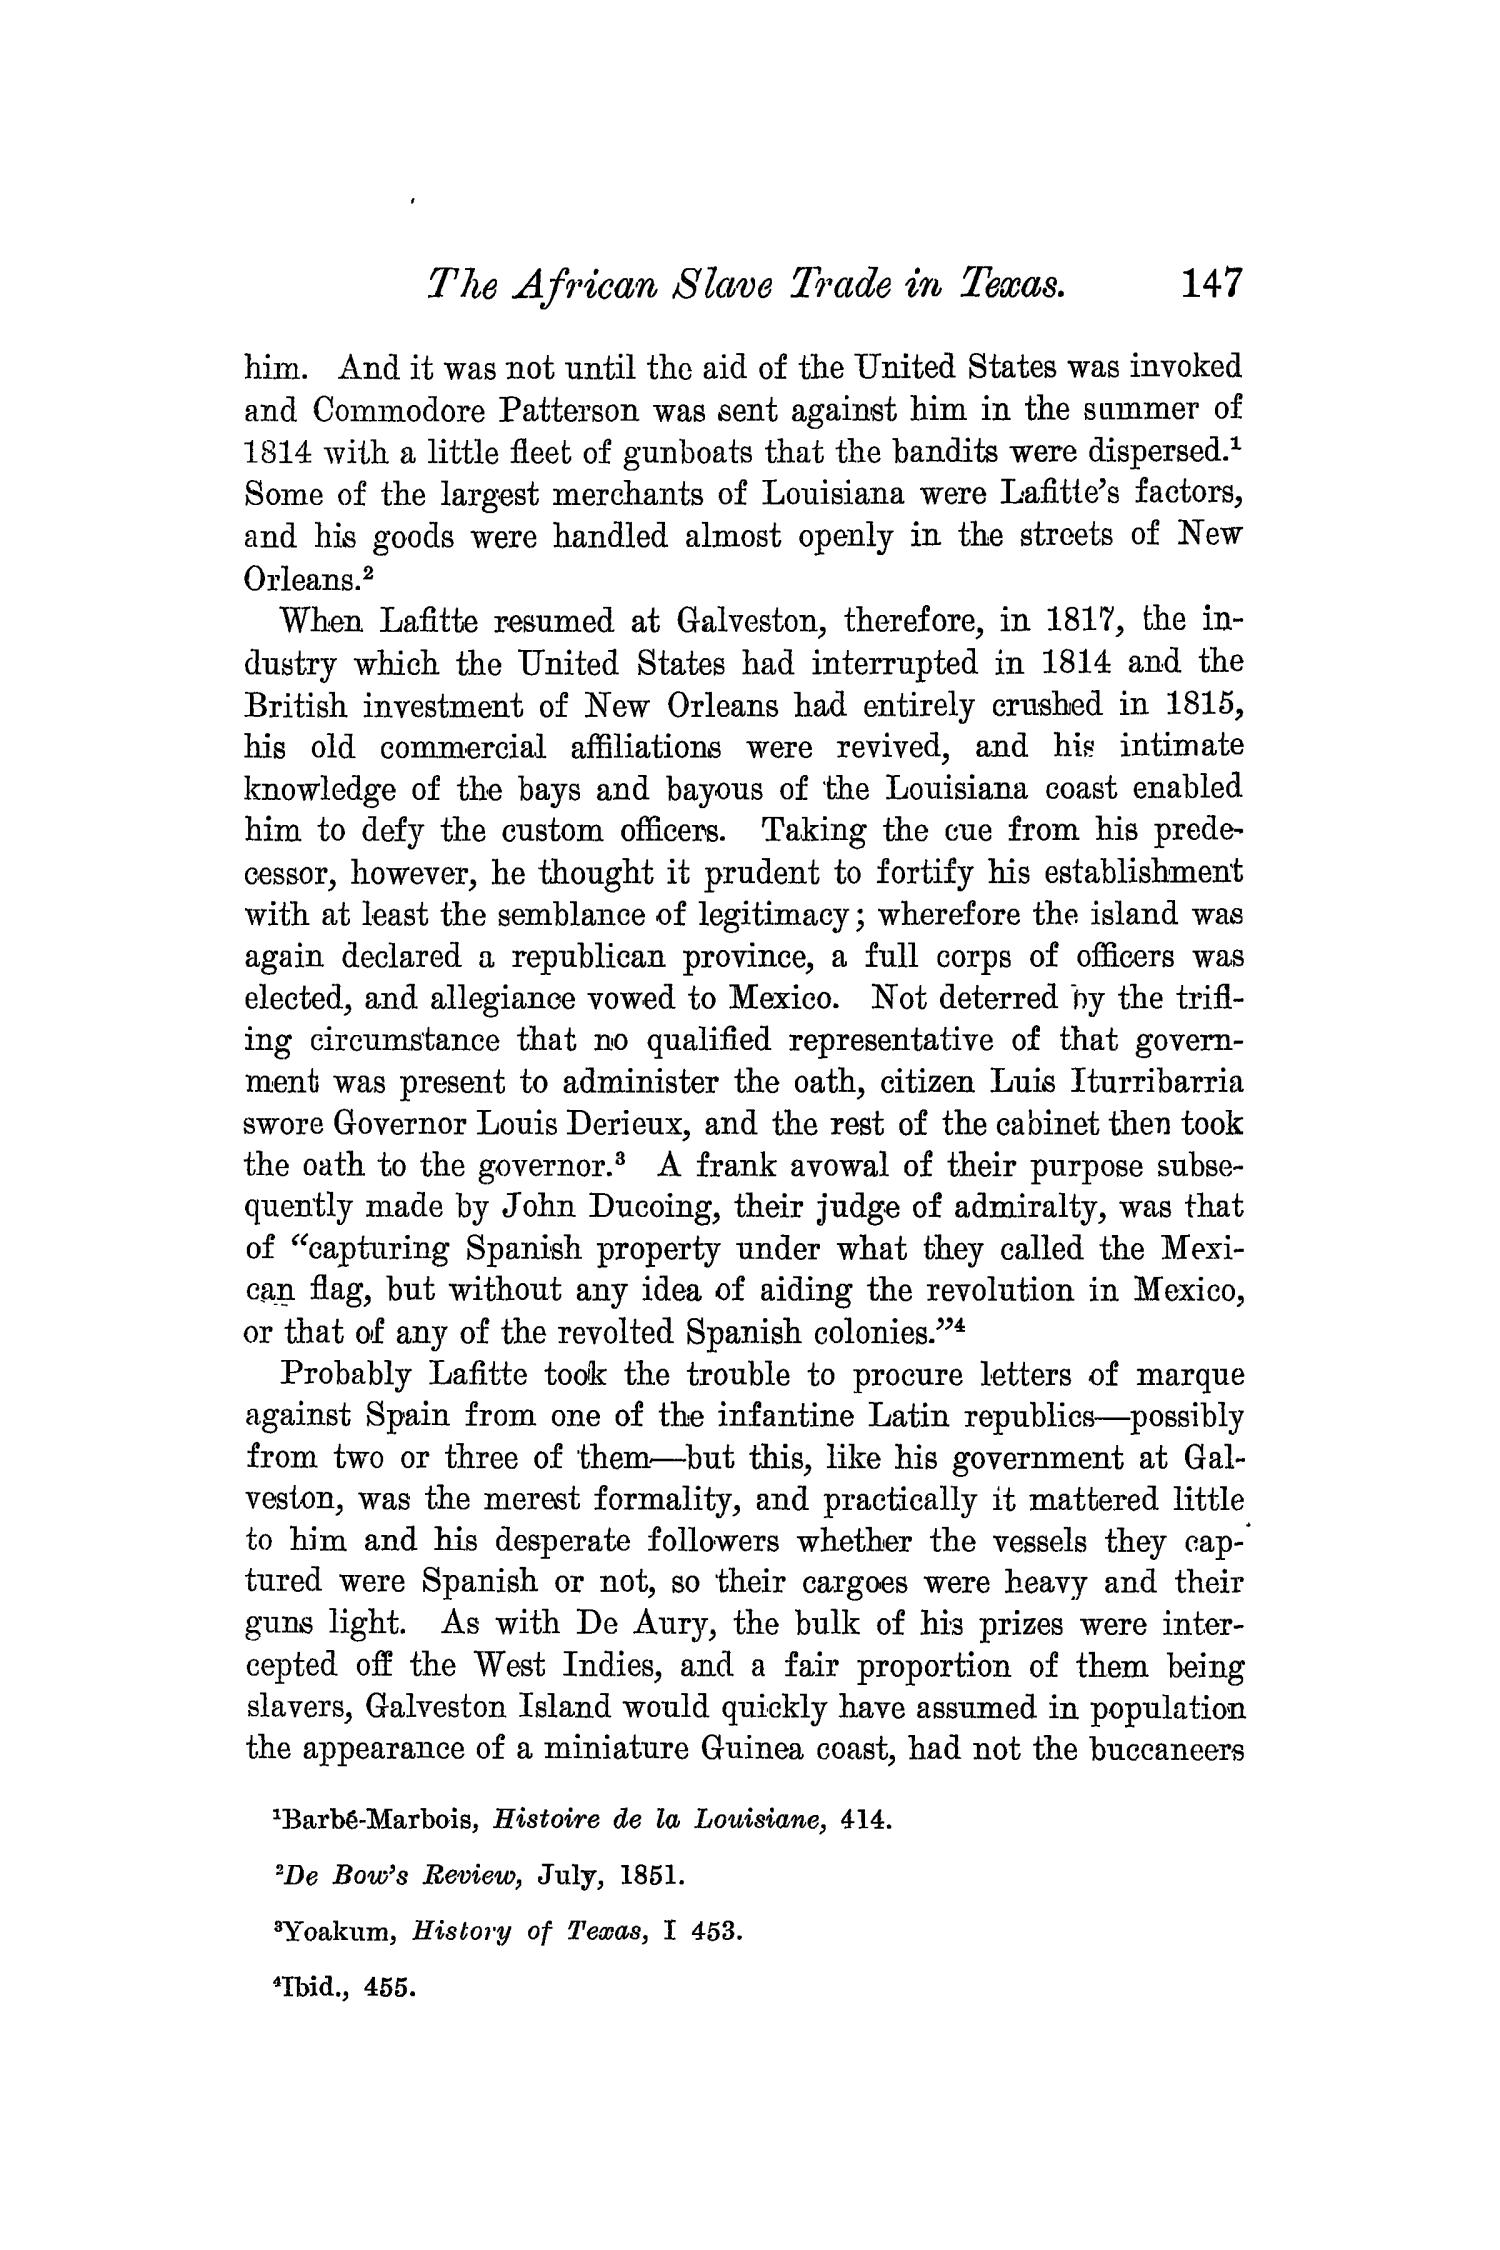 The Quarterly of the Texas State Historical Association, Volume 6, July 1902 - April, 1903
                                                
                                                    147
                                                